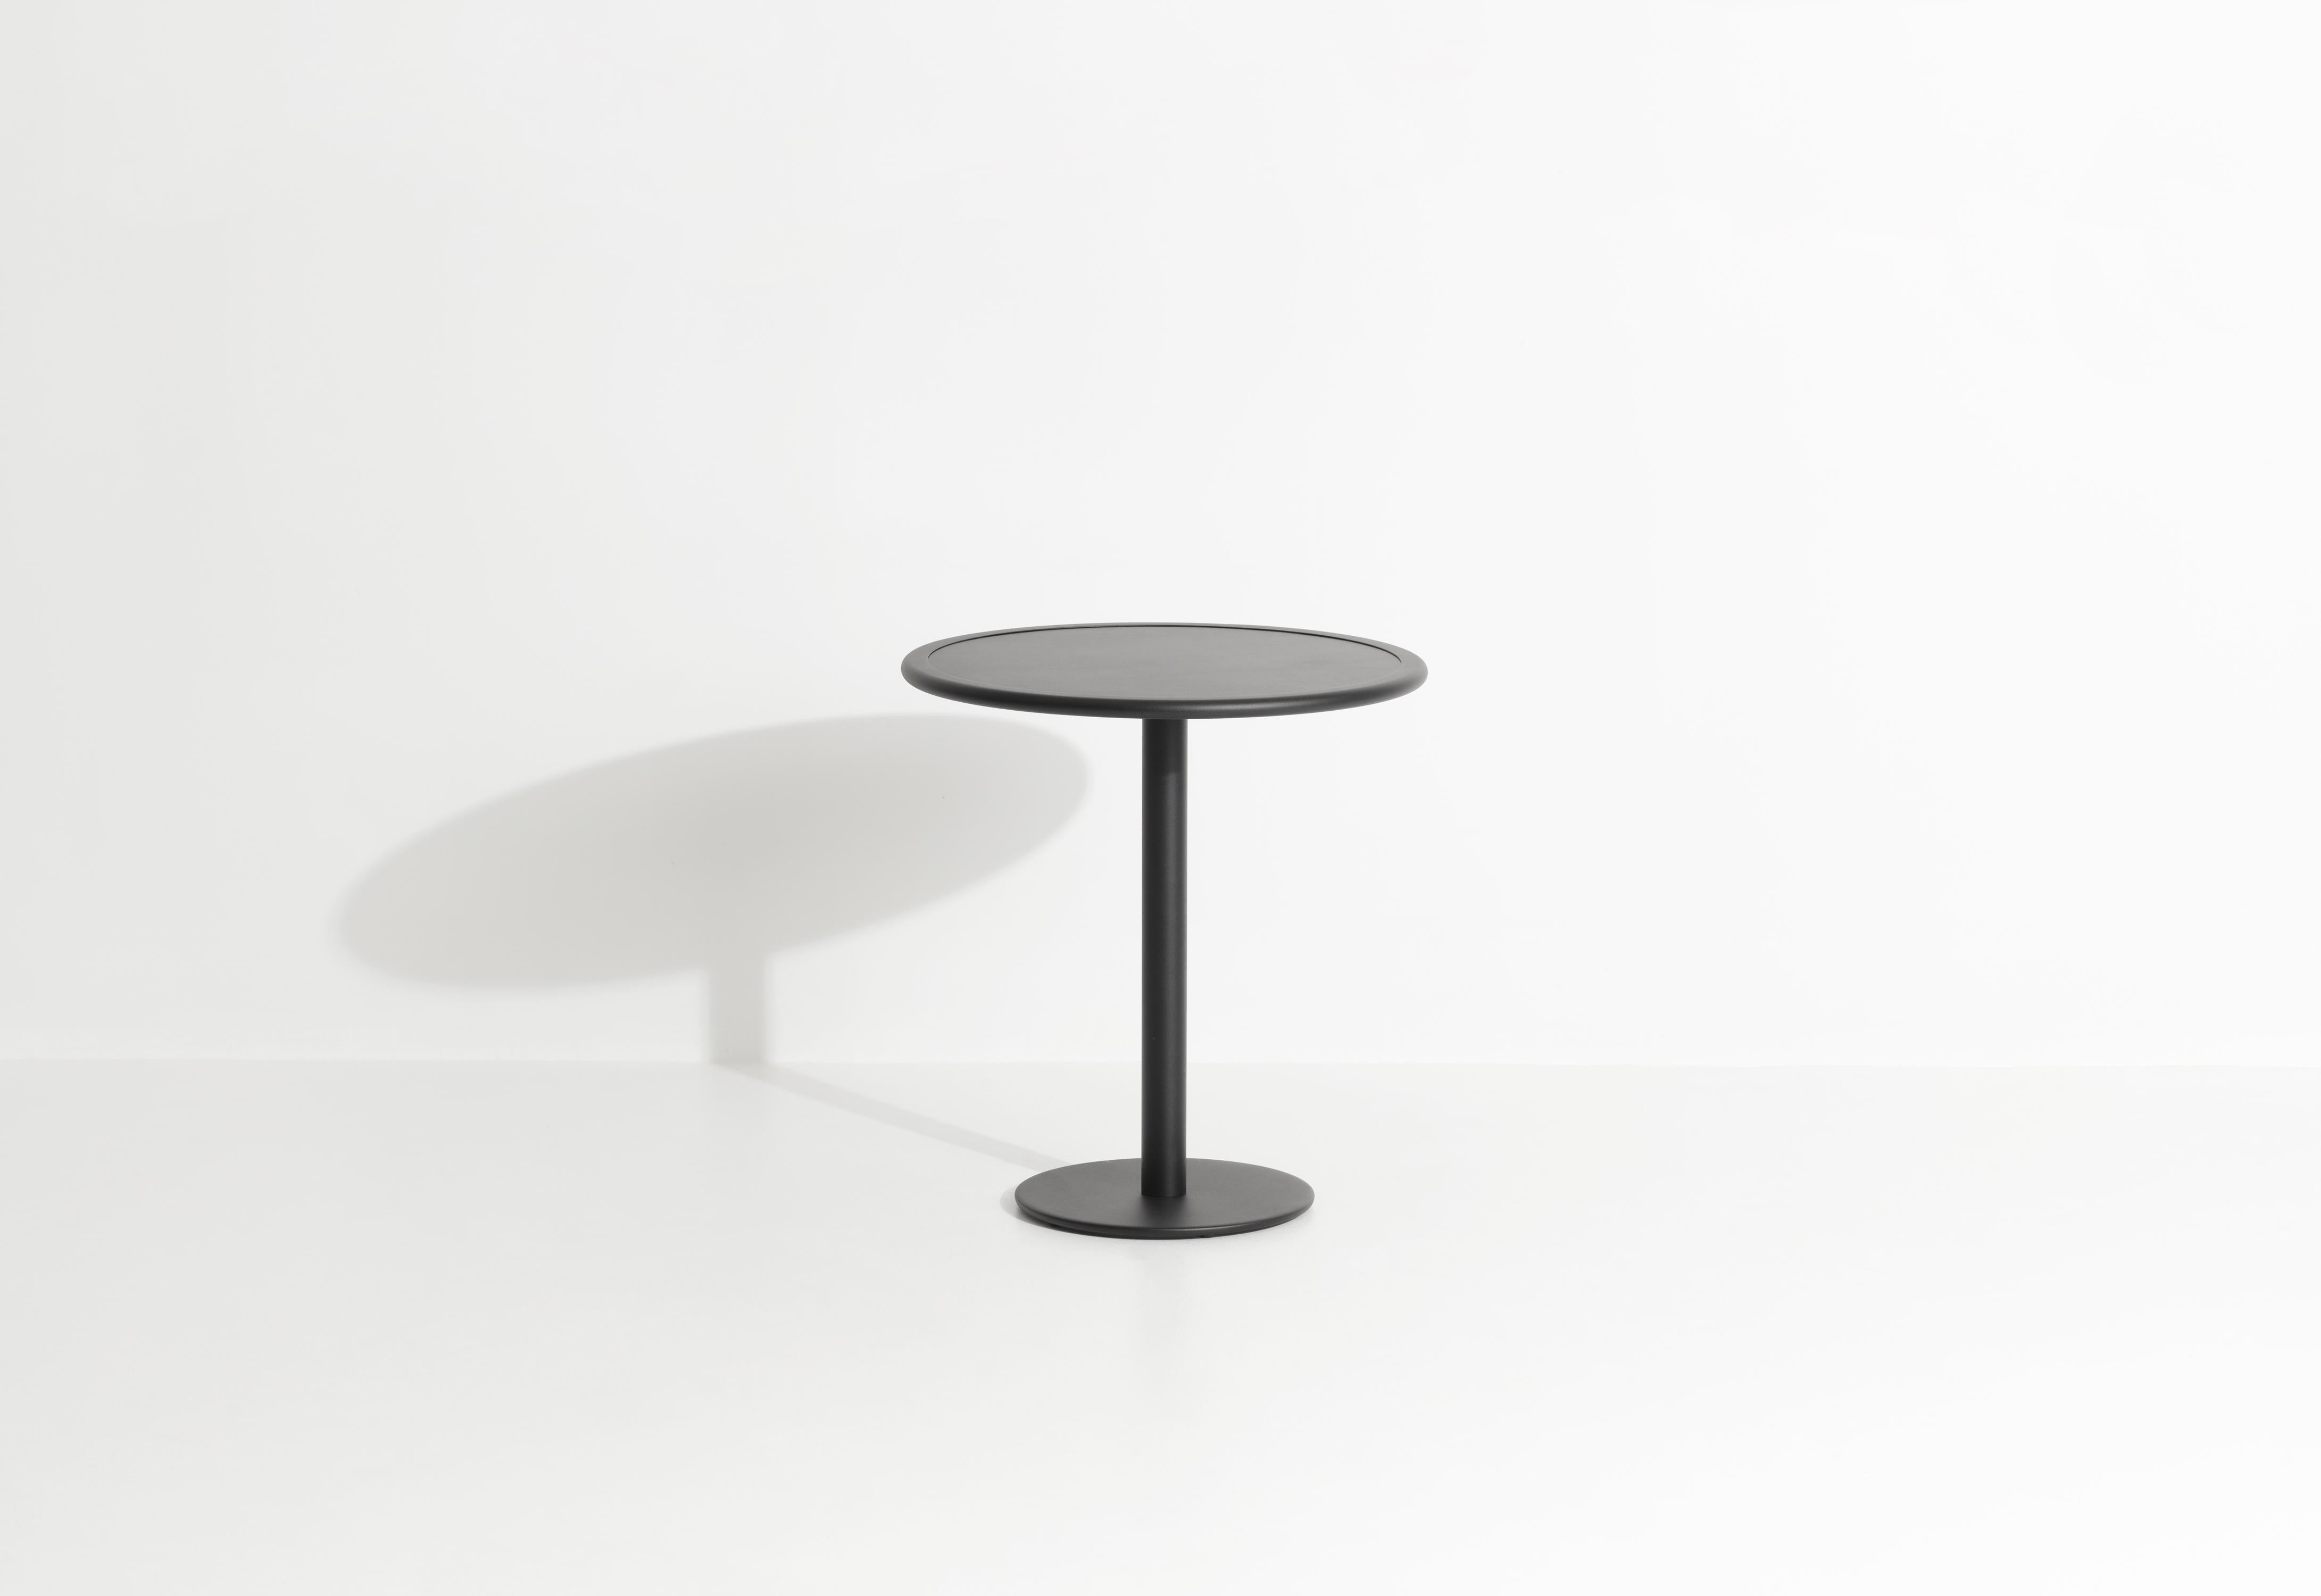 Petite Friture Week-End Bistro Round Dining Table in Black Aluminium by Studio BrichetZiegler, 2017

The week-end collection is a full range of outdoor furniture, in aluminium grained epoxy paint, matt finish, that includes 18 functions and 8